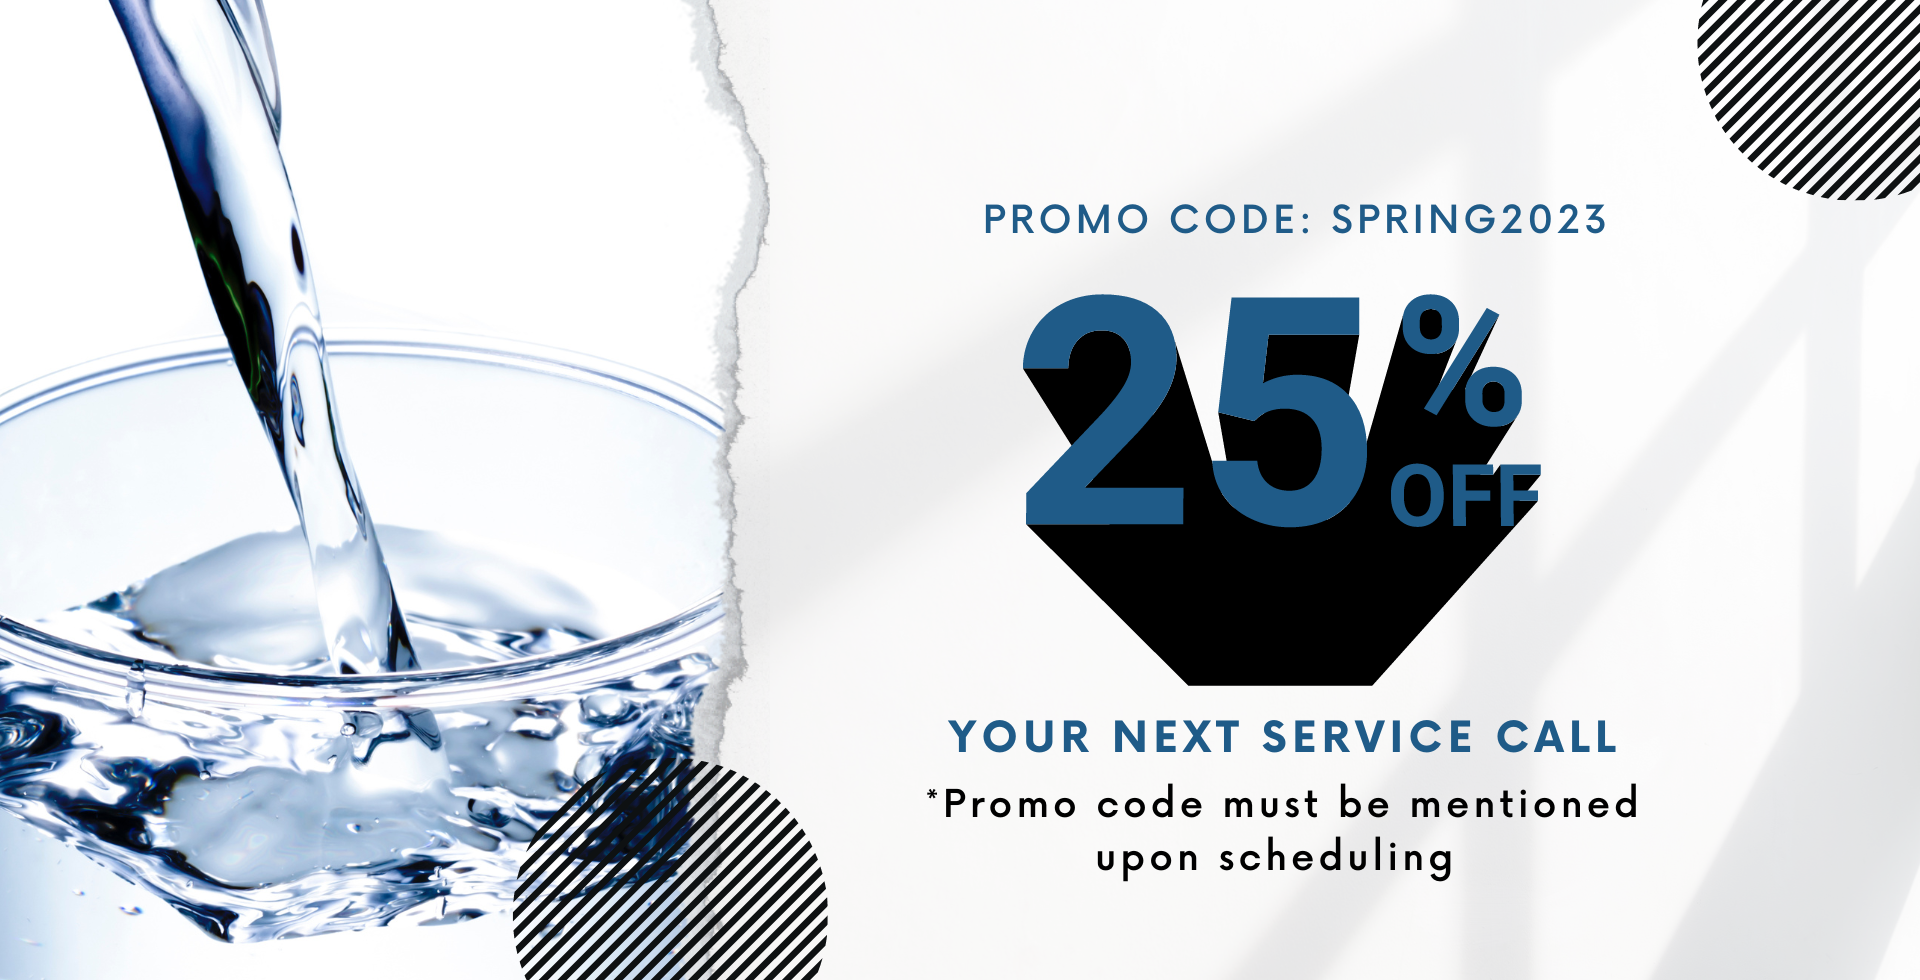 Canadian Water Conditioning Spring 2023 Promo Code 25% Off